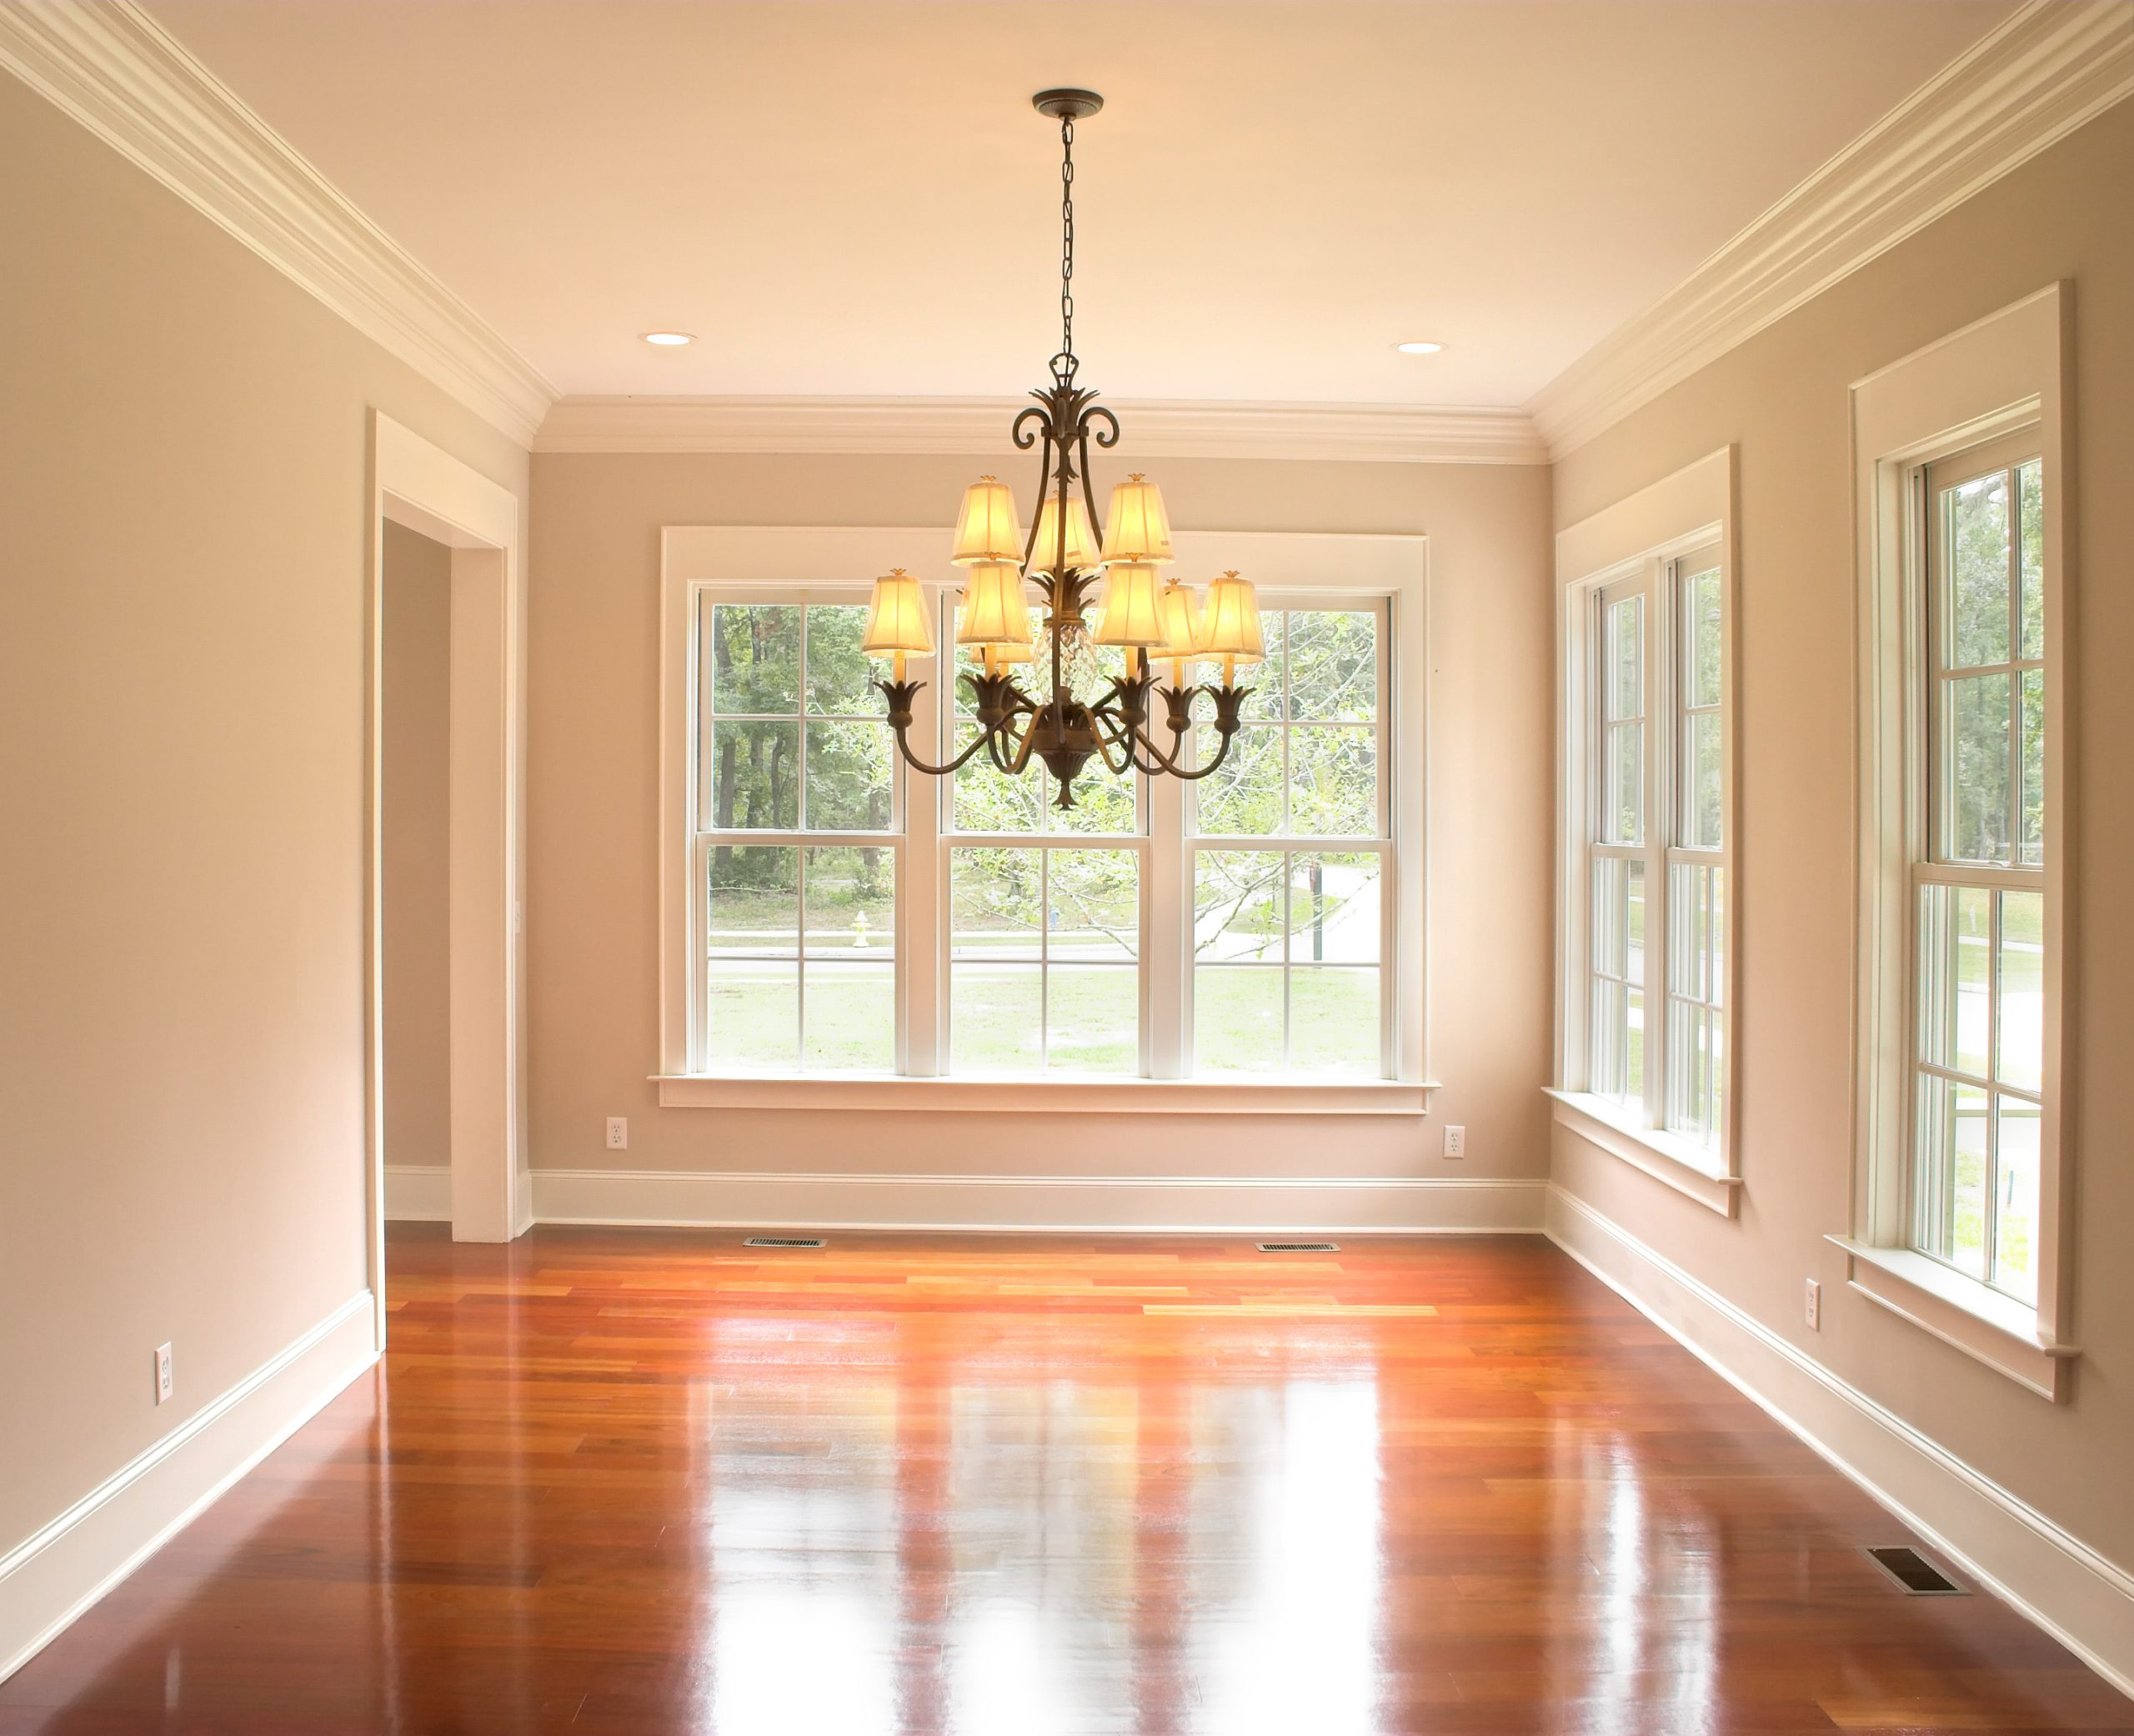 An empty living room with a chandelier, crown molding, and a hardwood floor.